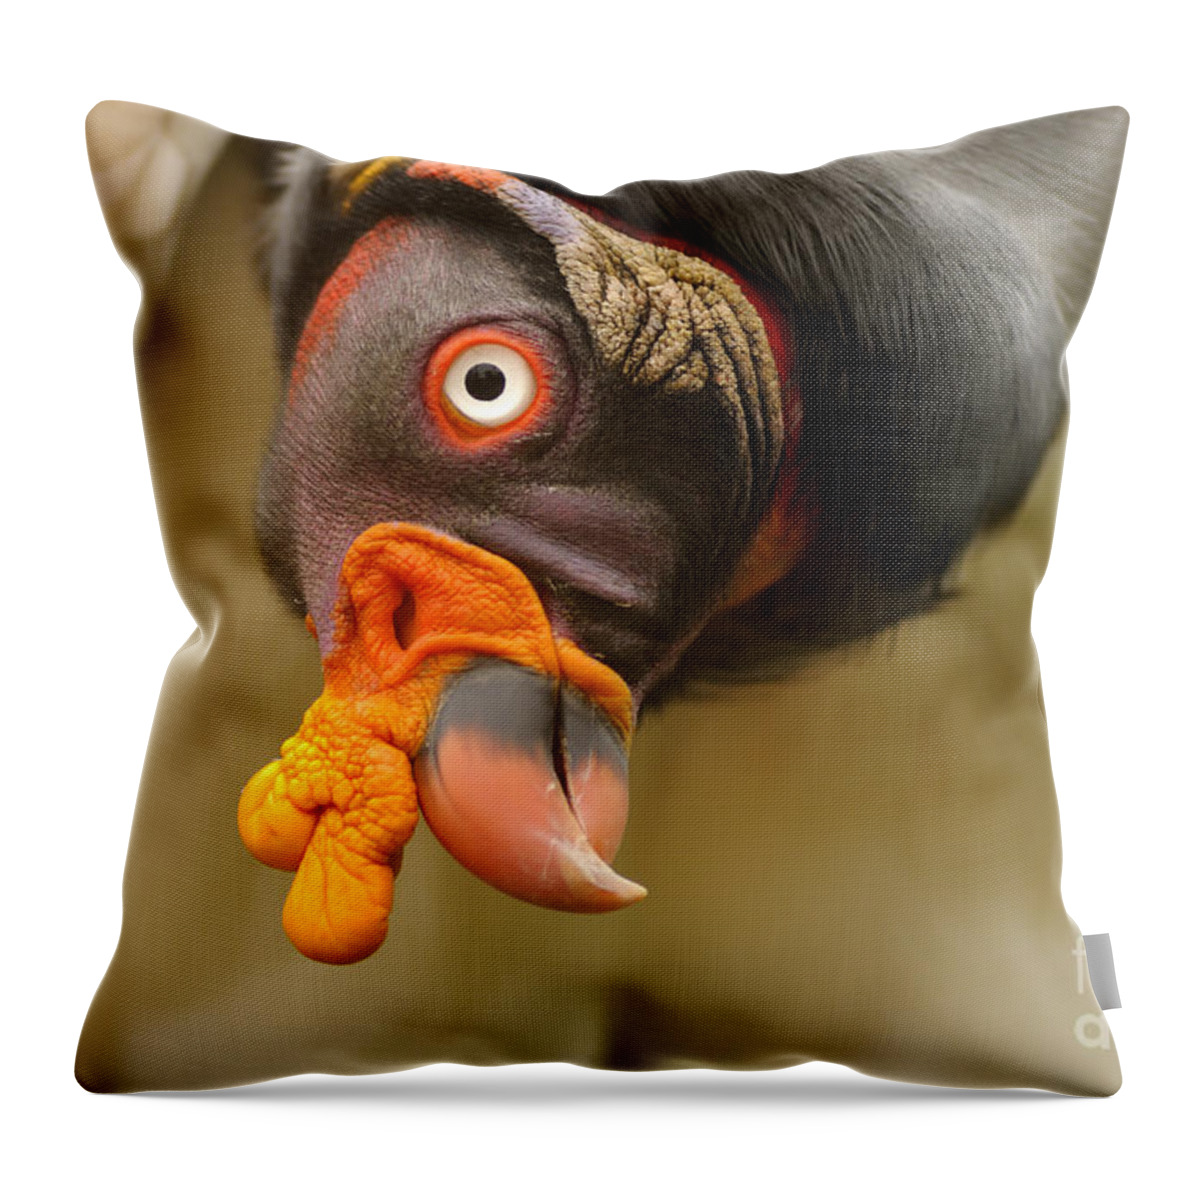 King Vulture Throw Pillow featuring the photograph King Vulture by Mark Bowler